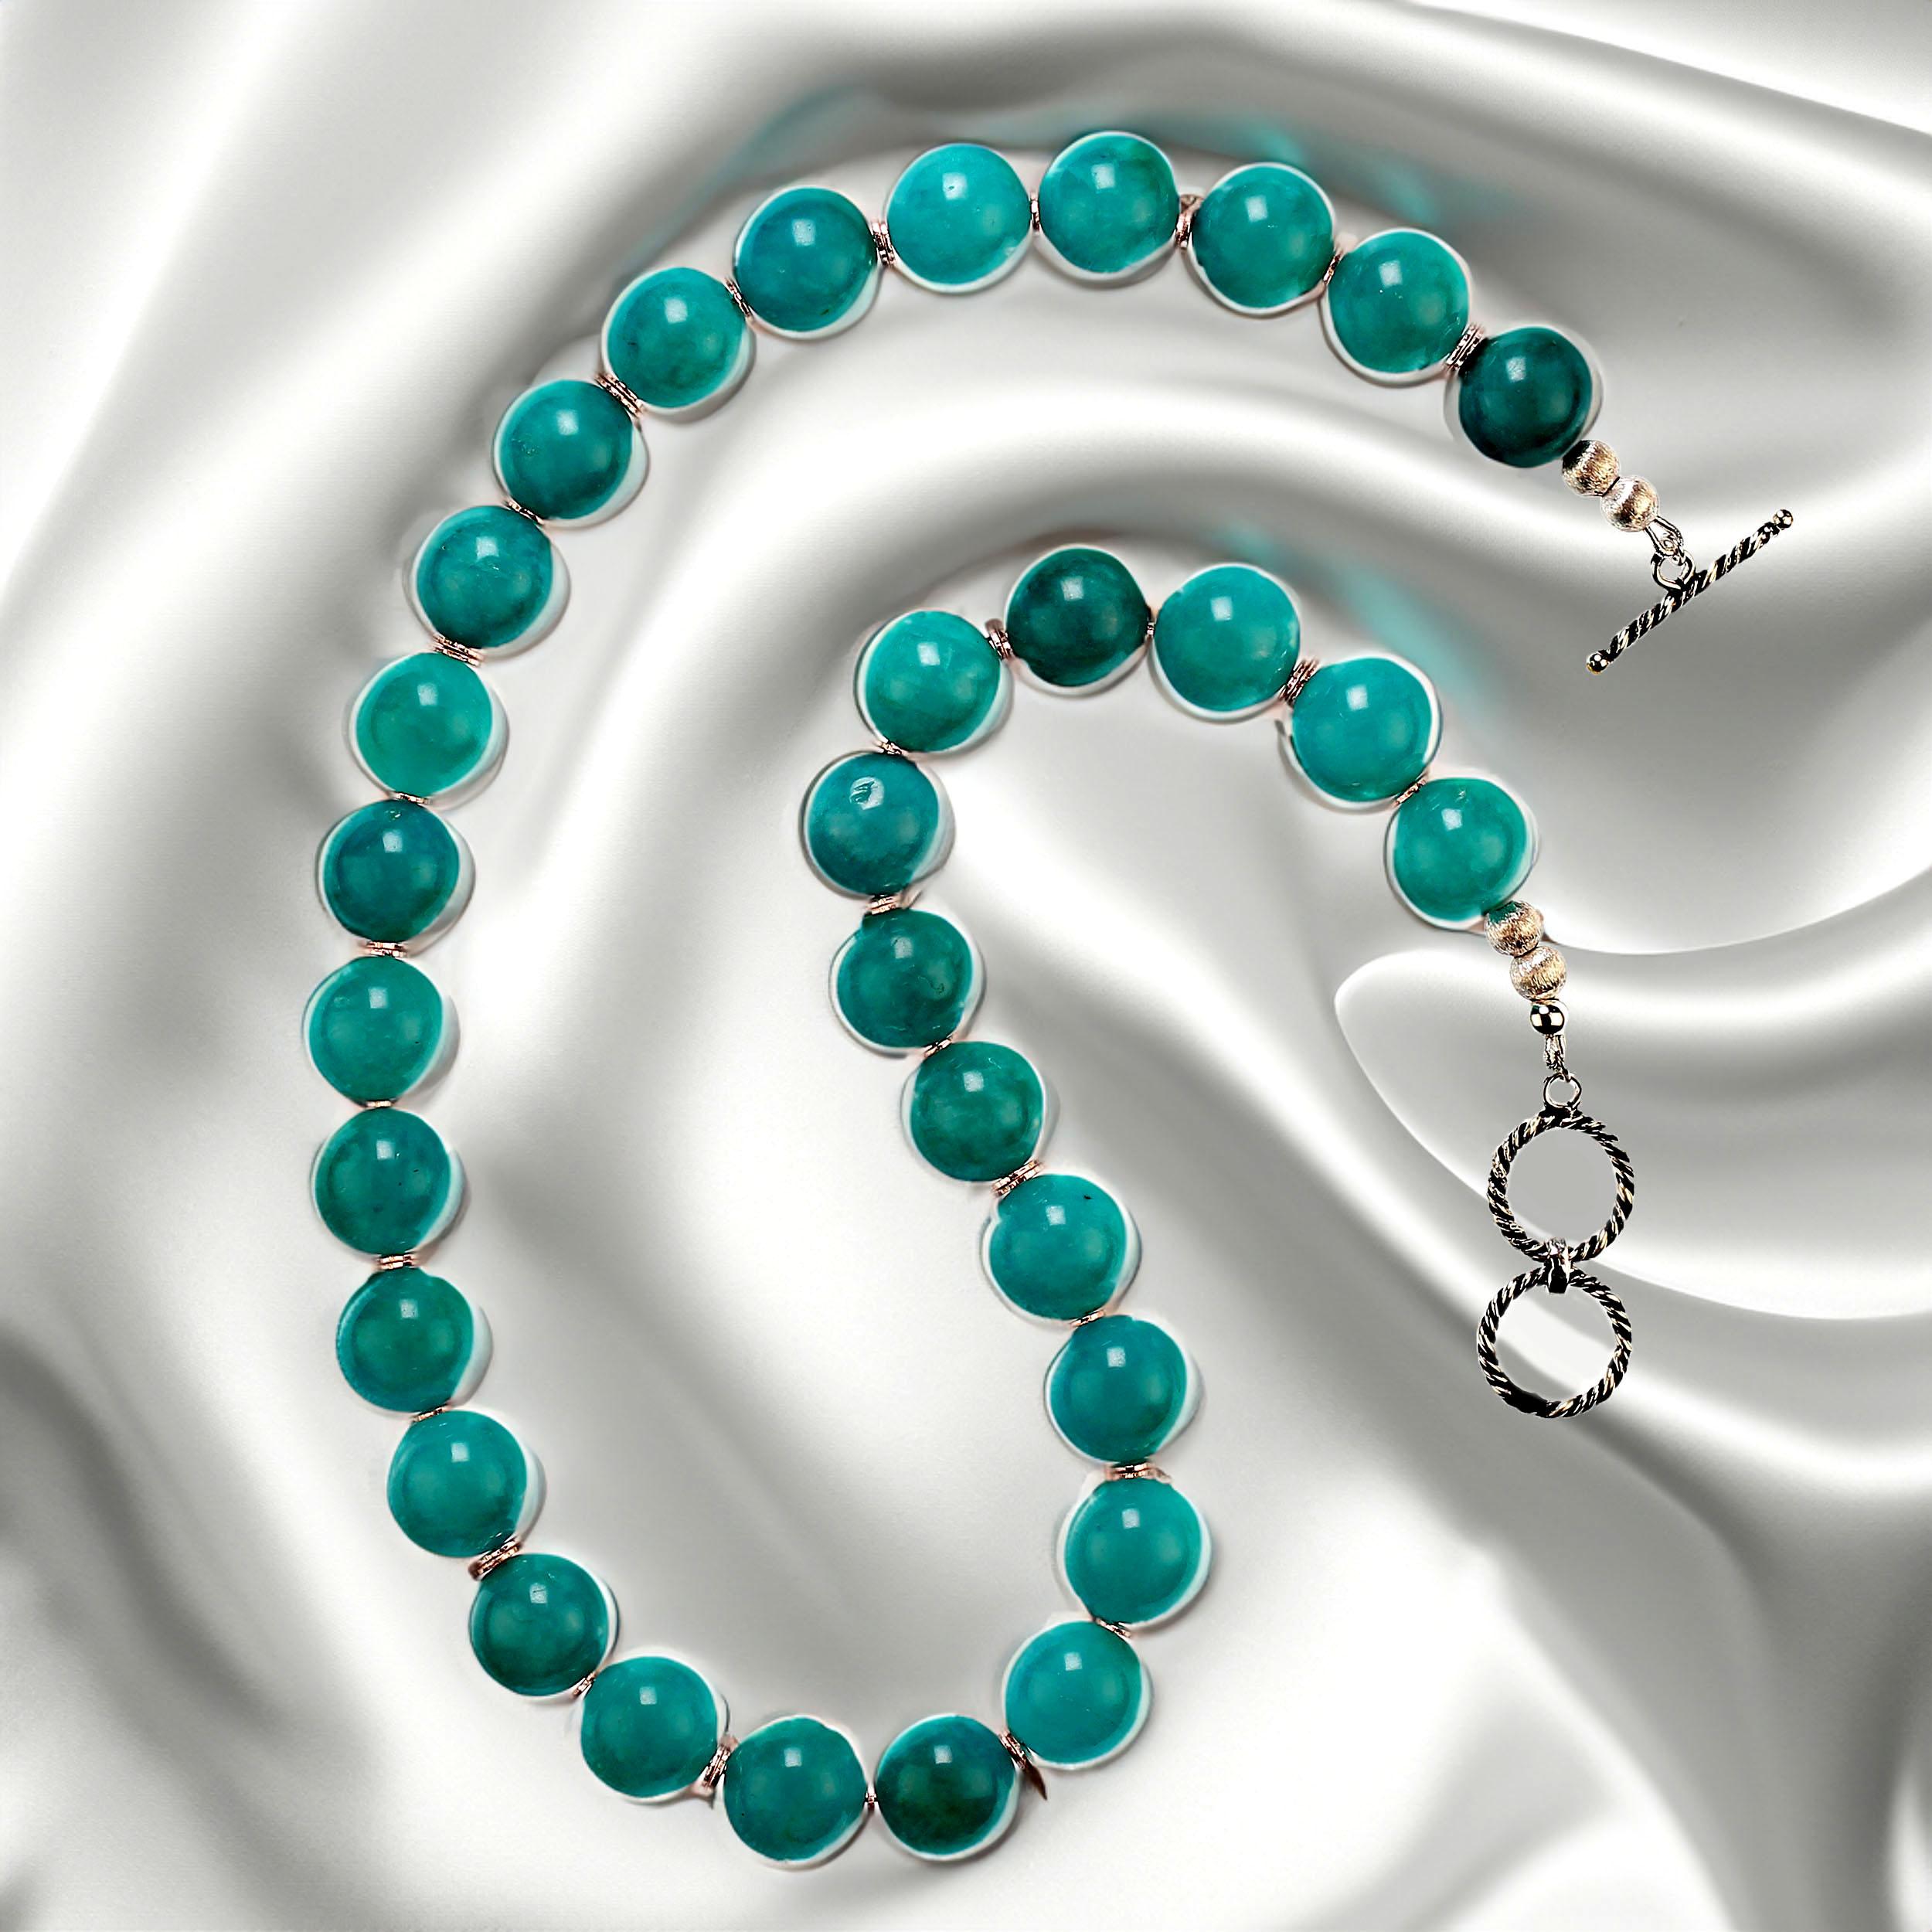 20 Inch necklace of glowing reconstituted amazonite with daisy shape silver tone accents.  This warm, glowing green with a touch of blue necklace is just the perfect finish for all your winter wardrobe.  It is secured with a twisted rope double loop